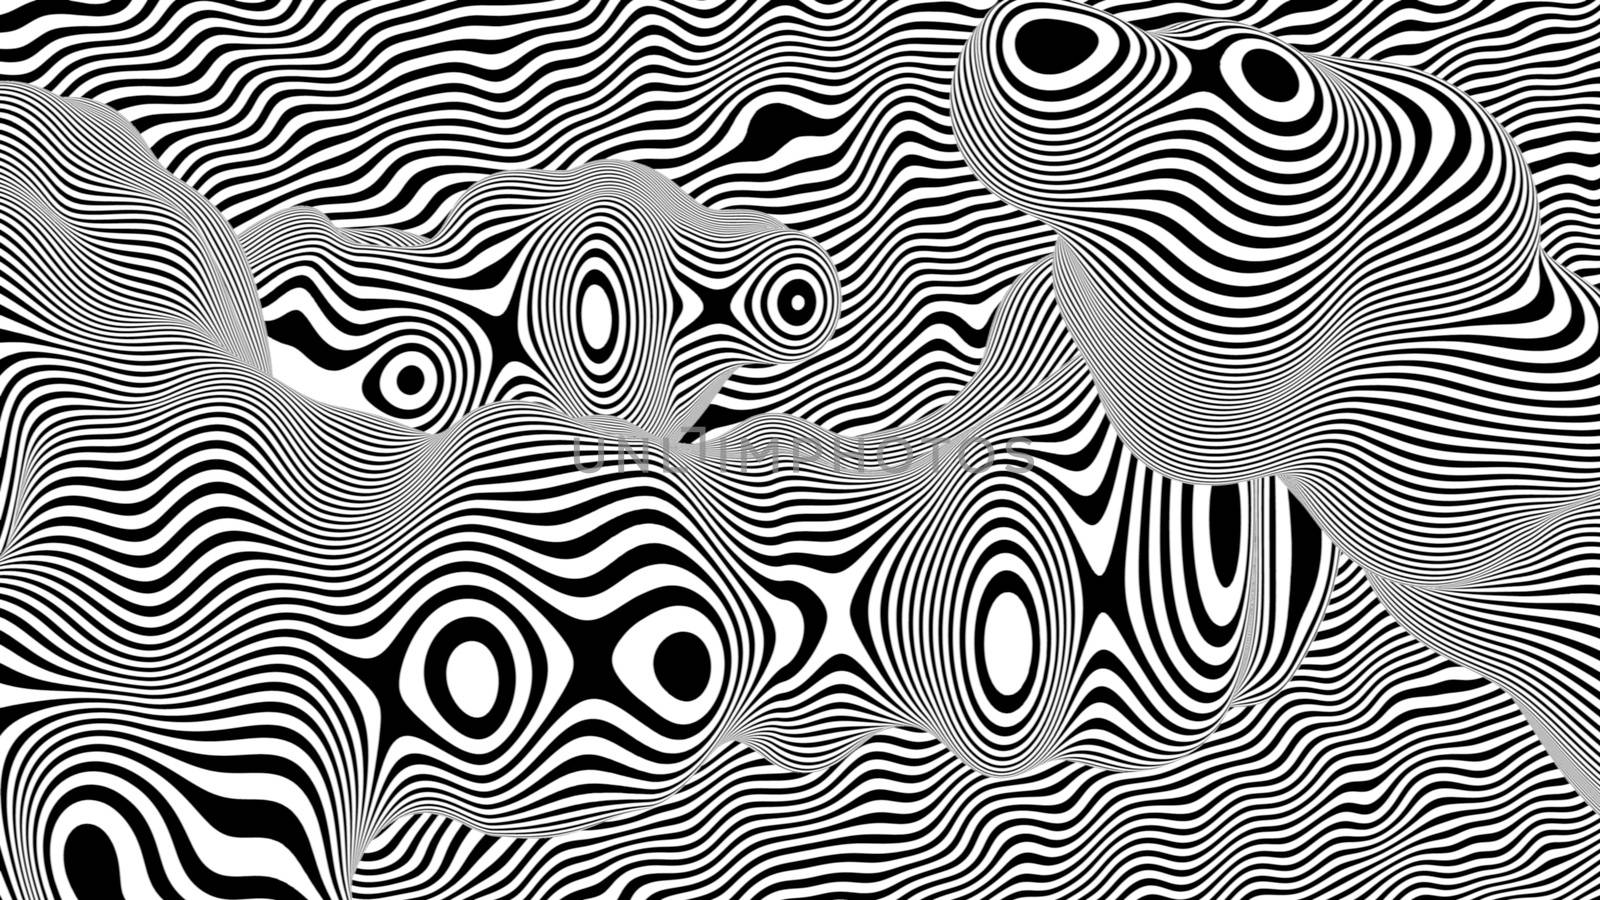 Black and white pop art wavy lines and spots by klss